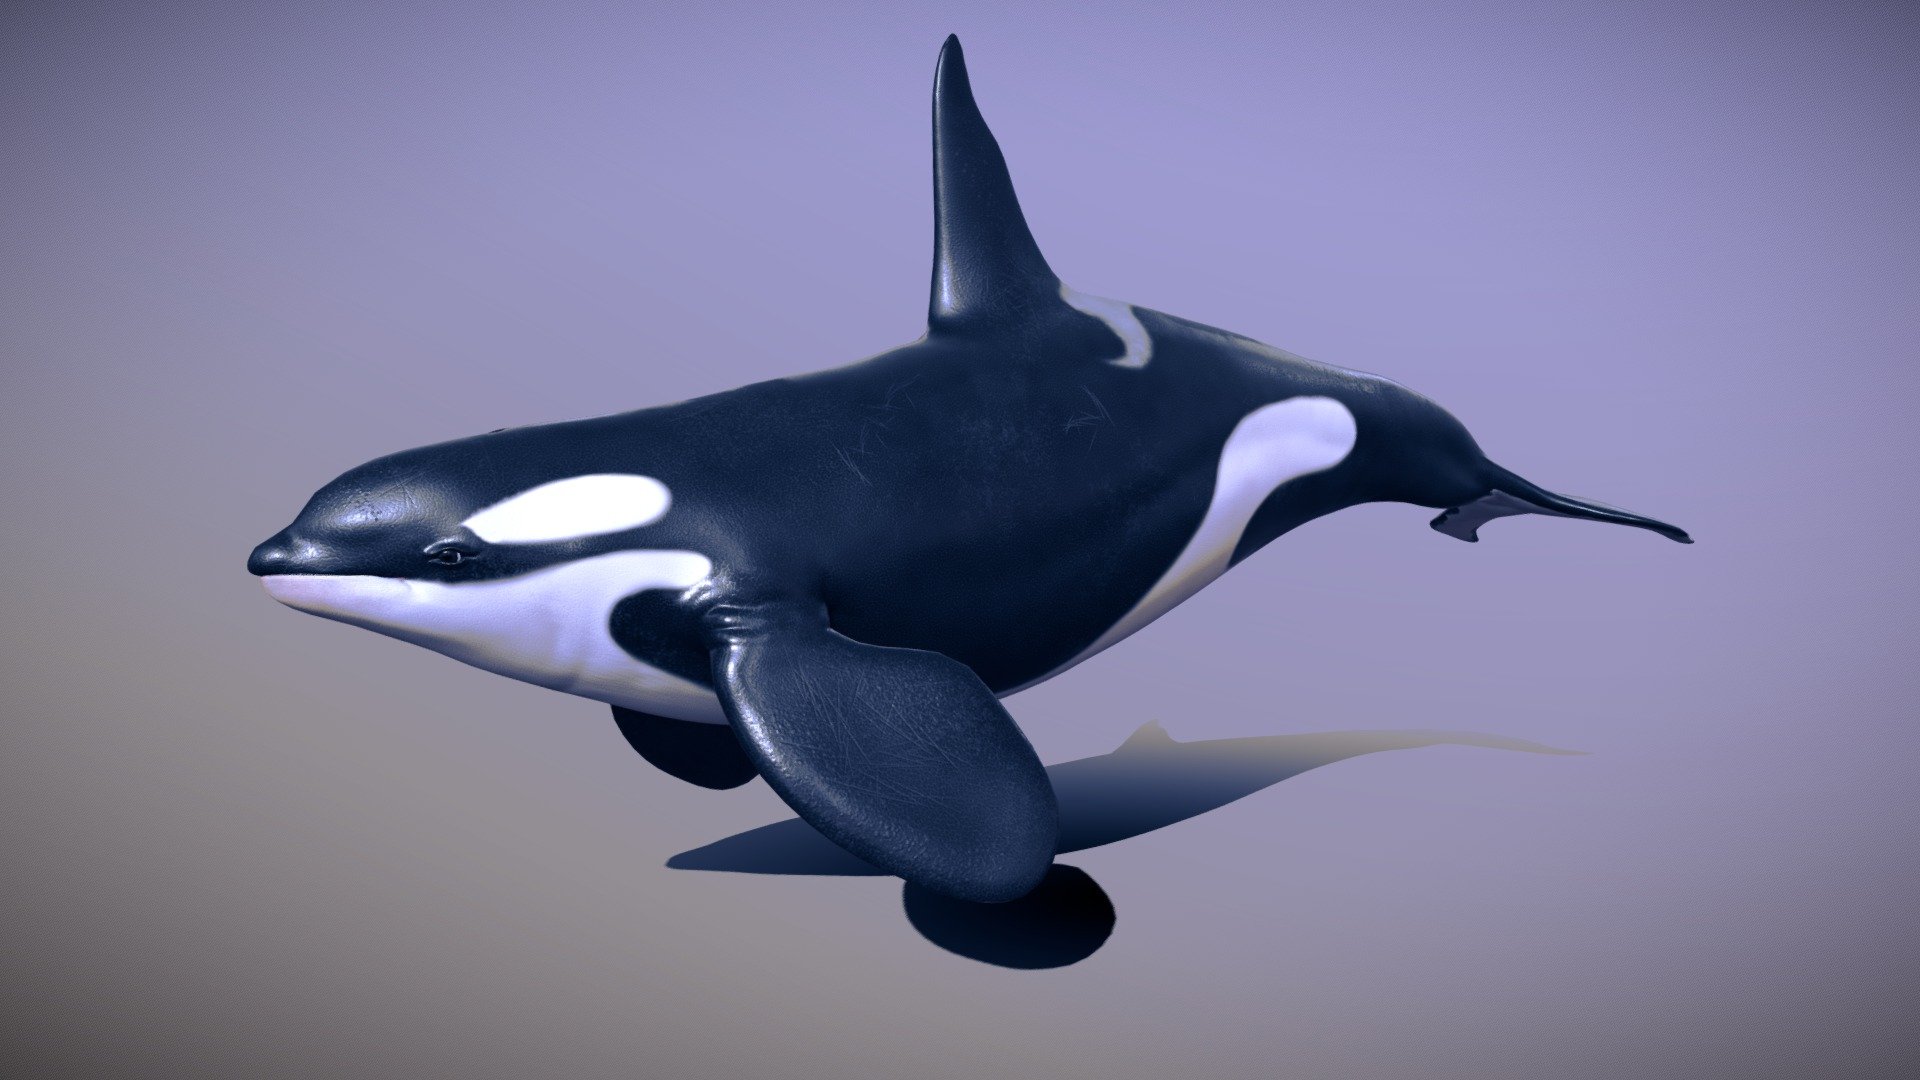 The orca 3d model was made in blender 2.9 and painted in substance painter,it counts with 10,032 verts, comes with 4k and 2k textures : diffuse , normal , roughness and AO maps .

uv wrapped manually , eye, tongue and teeth (the teeth is the only one overlapping ) all is in one texture . 

It is fully rigged with basic bones , it have a total of 5 animations : idle , swim1 ,swim 2 ,speedup and a breathe/jump one

Comes with a fbx, blend file and textures 3d model